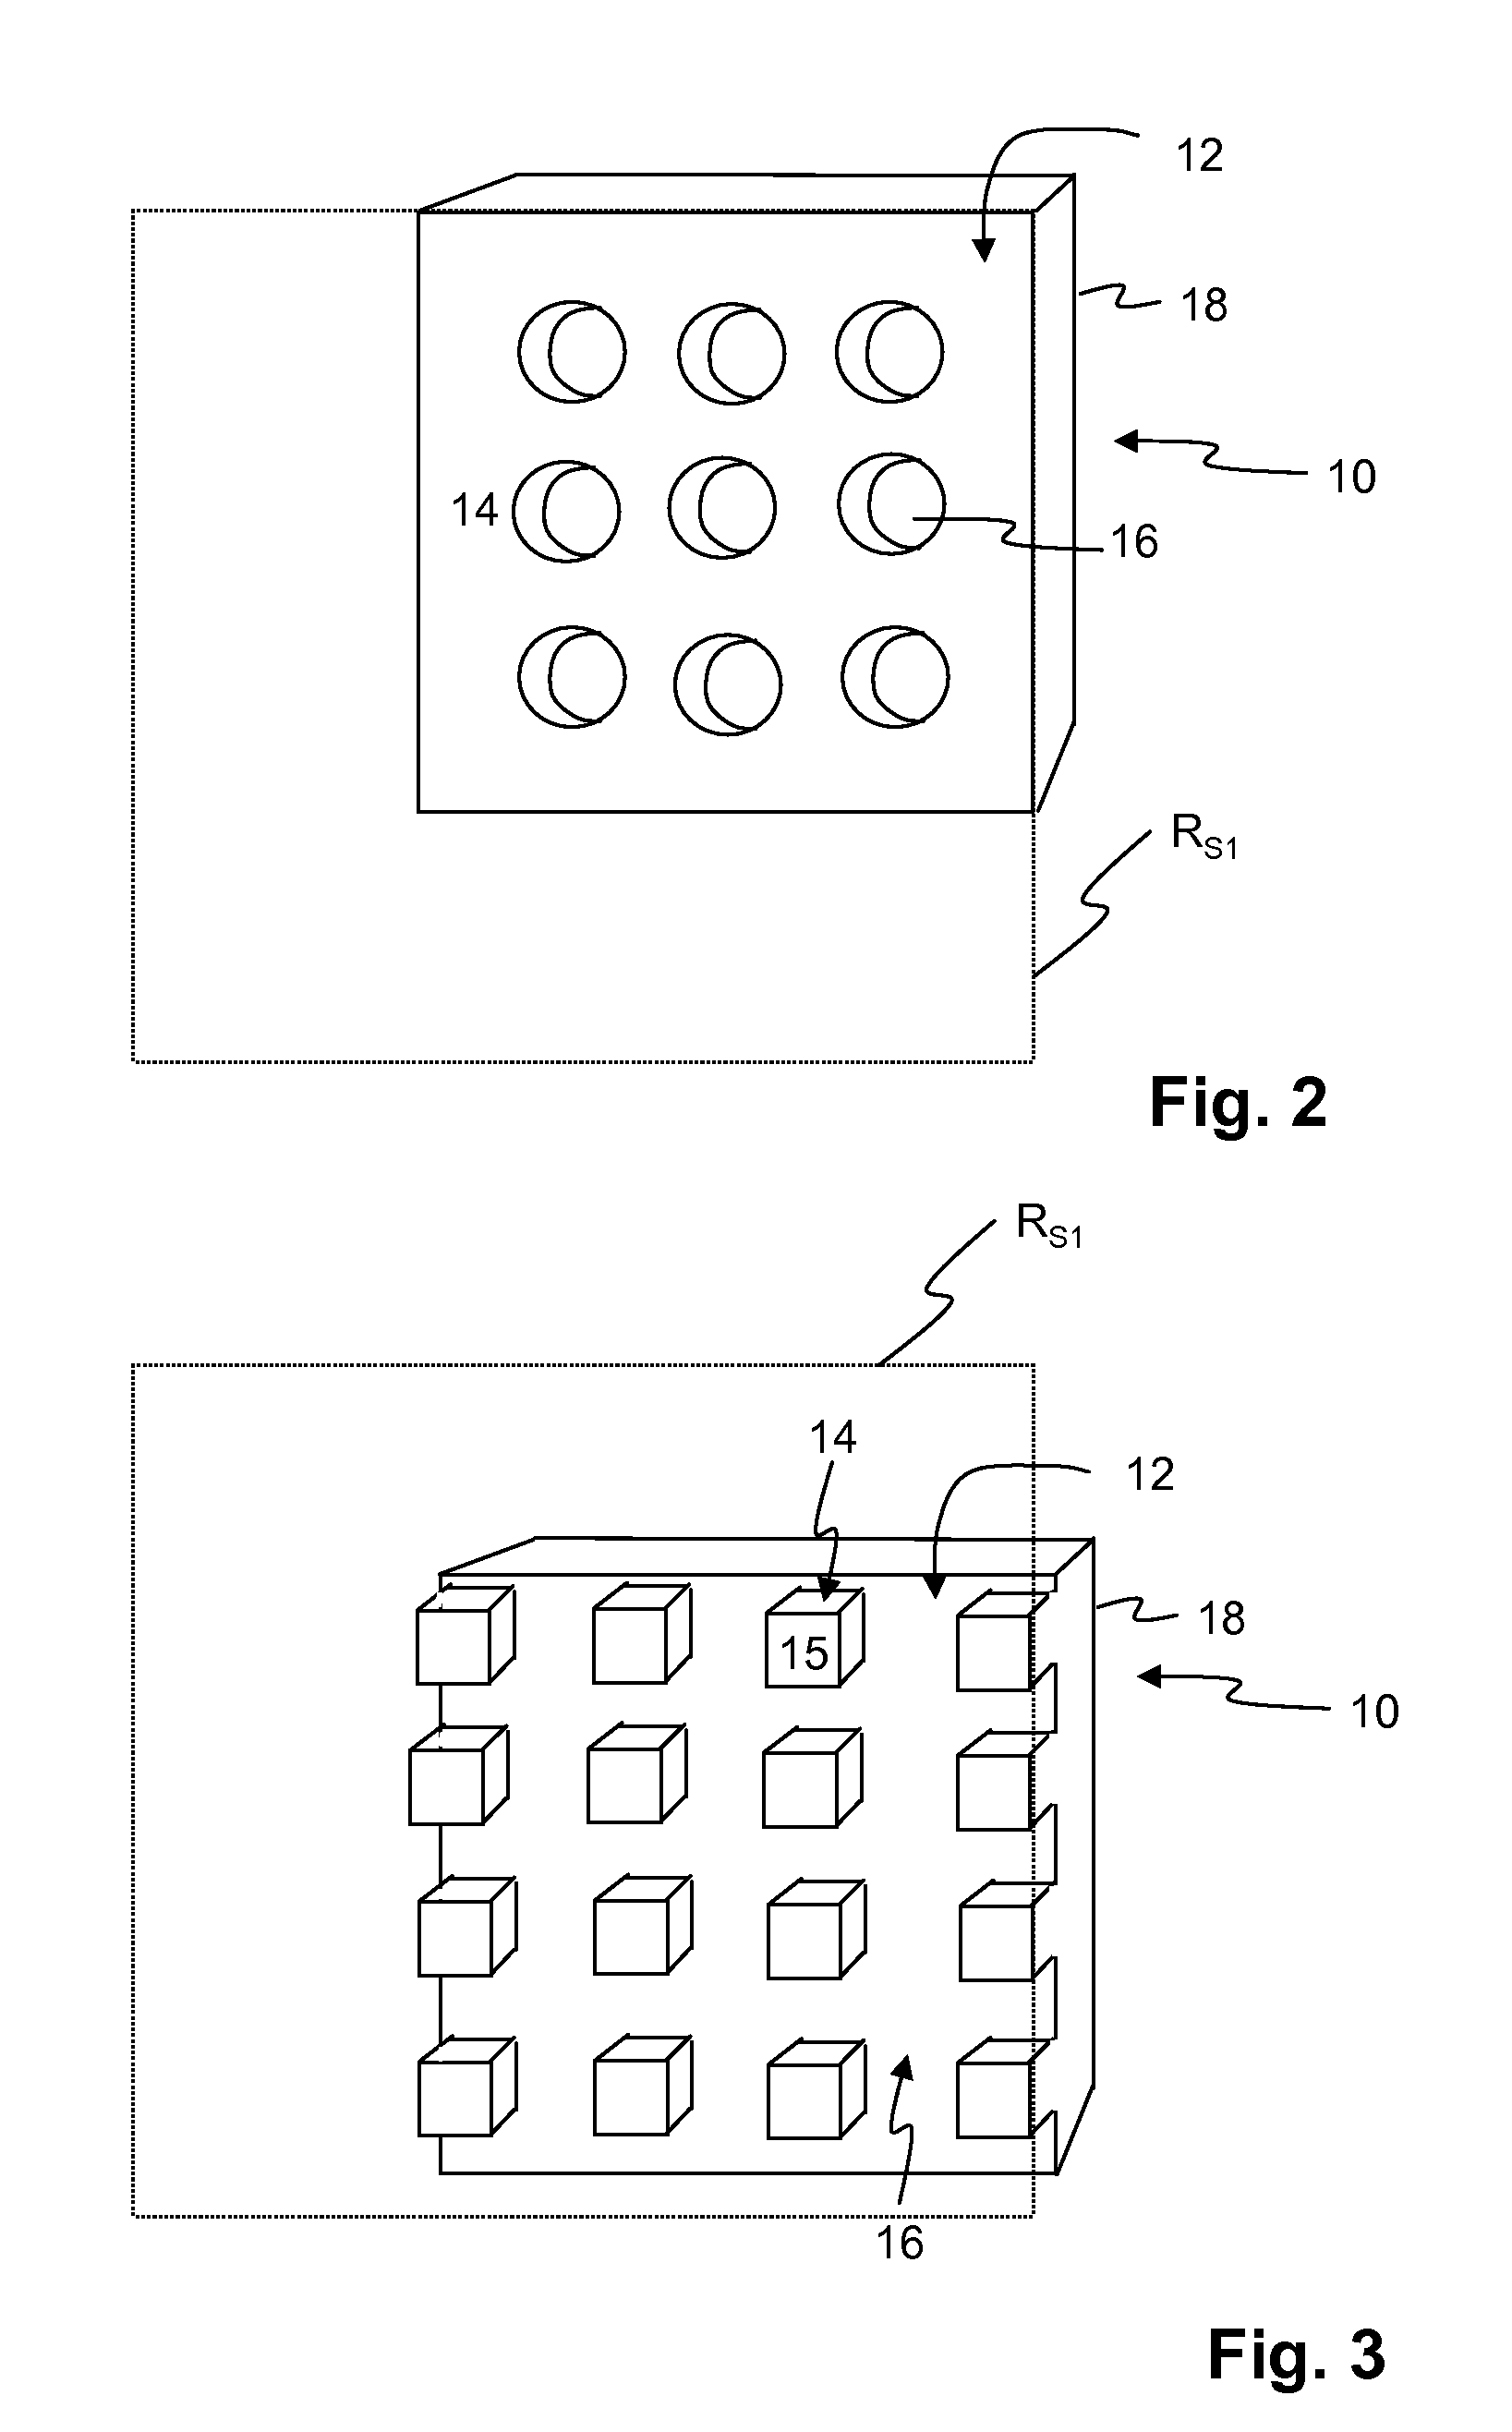 Method of producing a wafer scale package